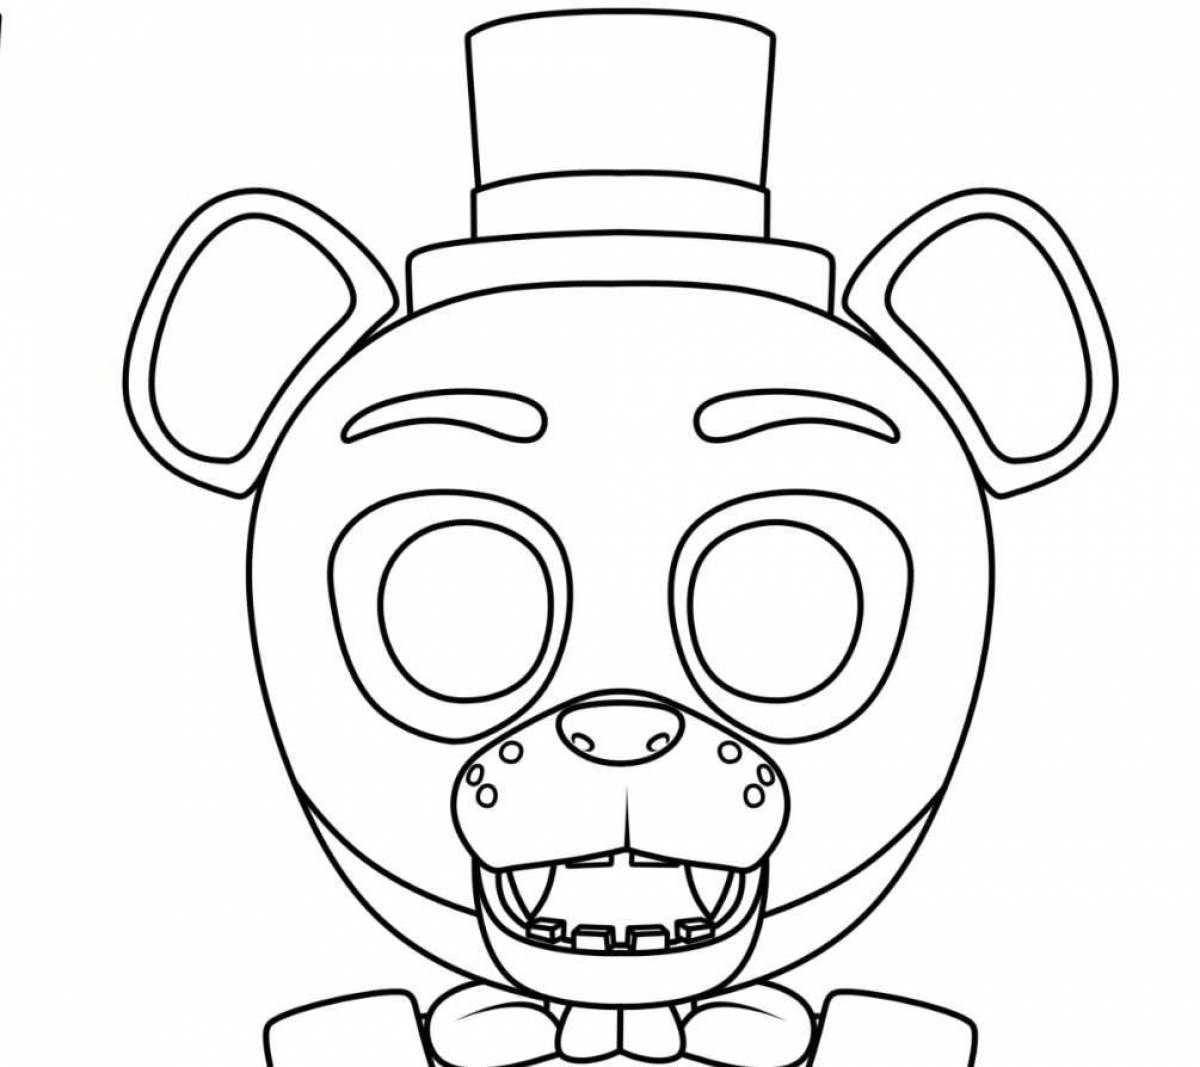 Freddy's colorful coloring page